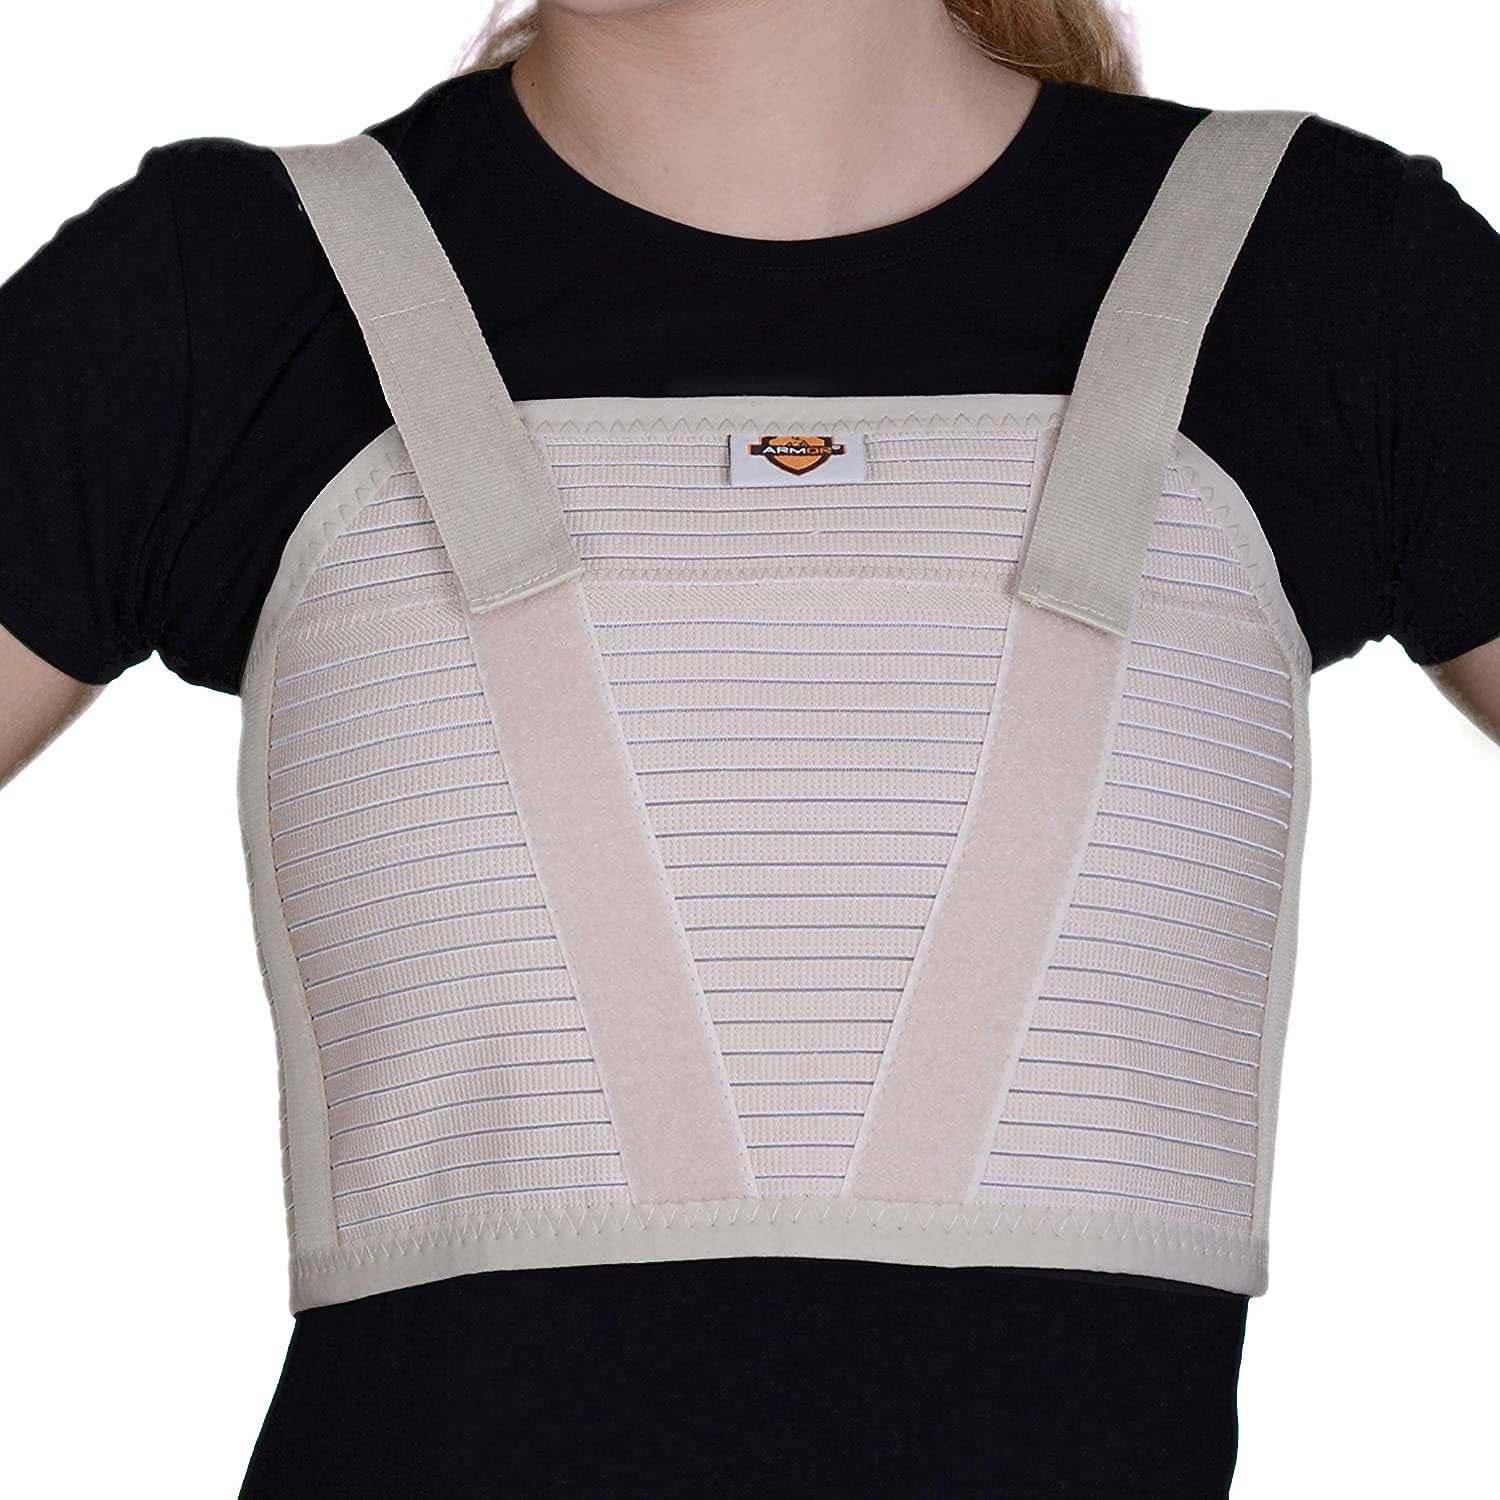 Armor Adult Unisex Chest Support Brace to Stabilize the Thorax